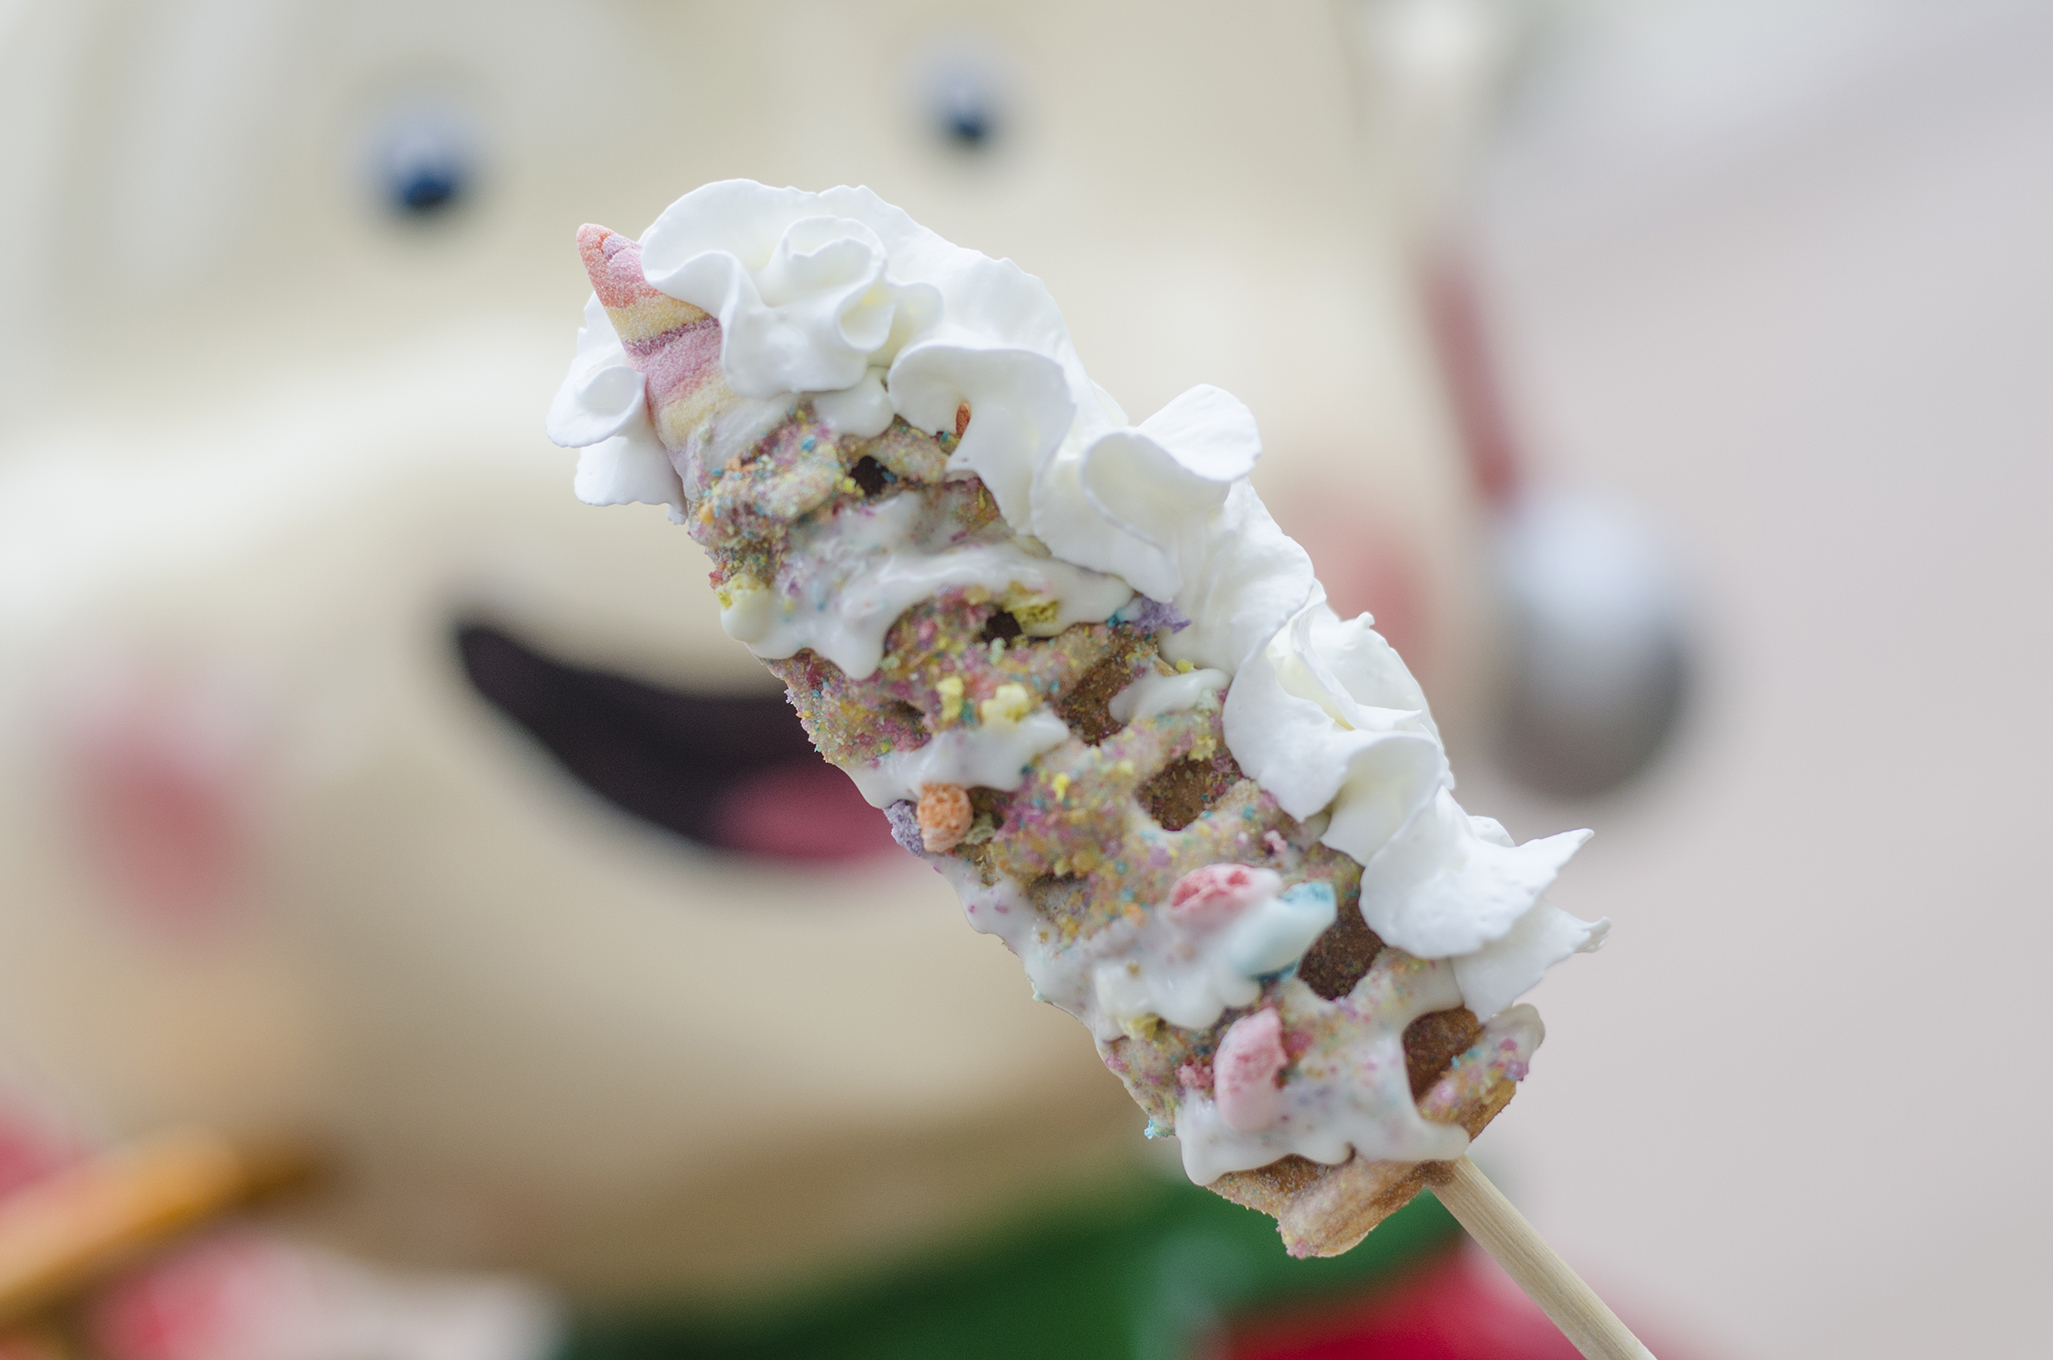 The Unicorn Waffle classic waffle is coated in white chocolate and a fruity magic dust.